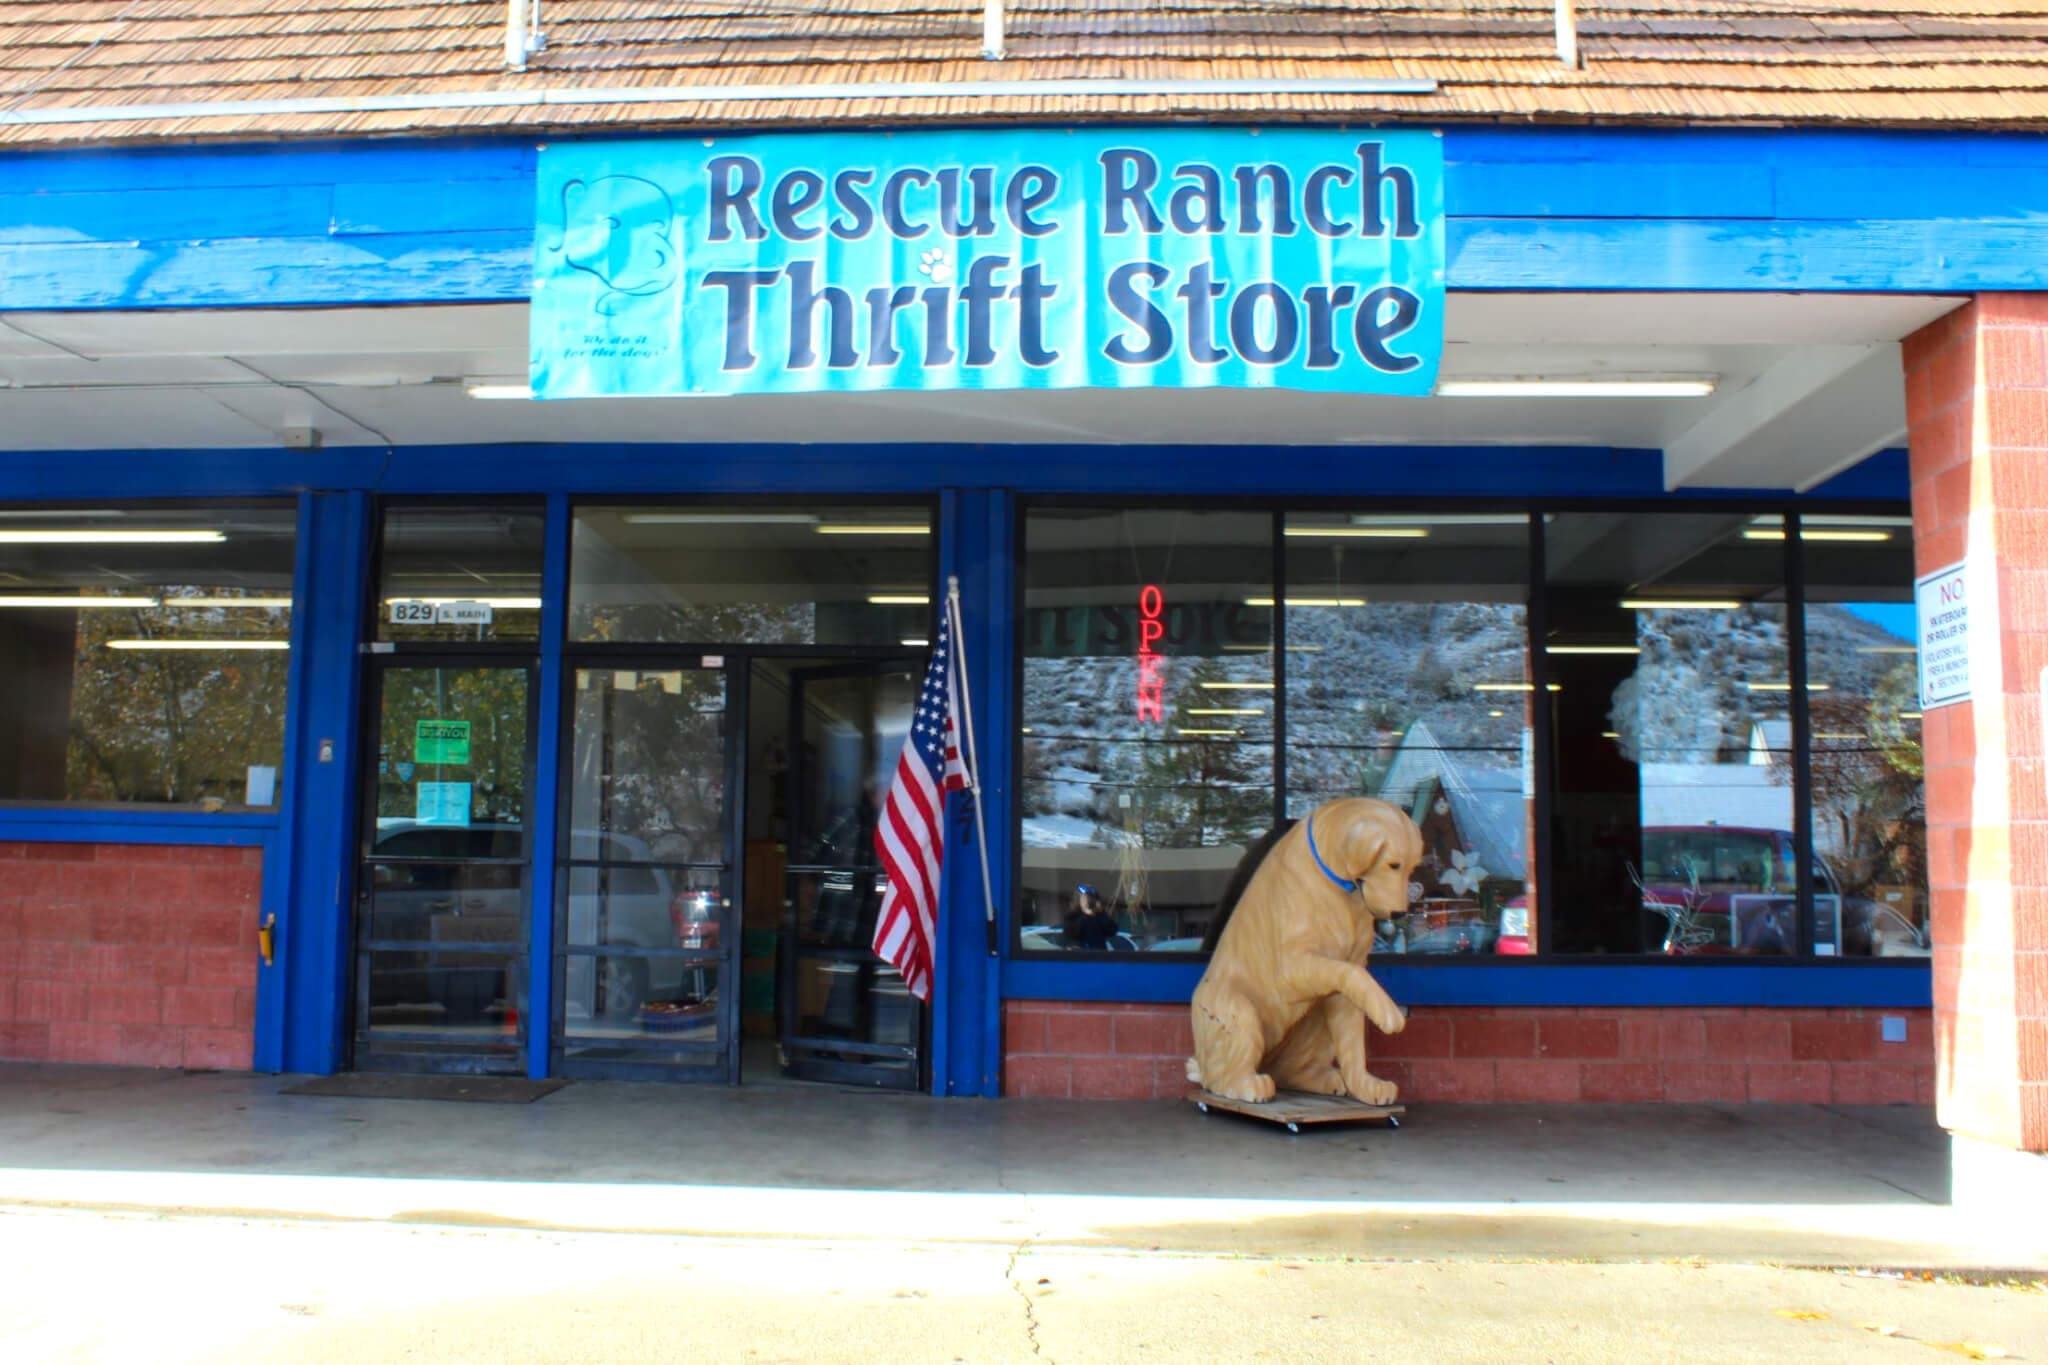 Rescue Ranch Thrift Store entrance